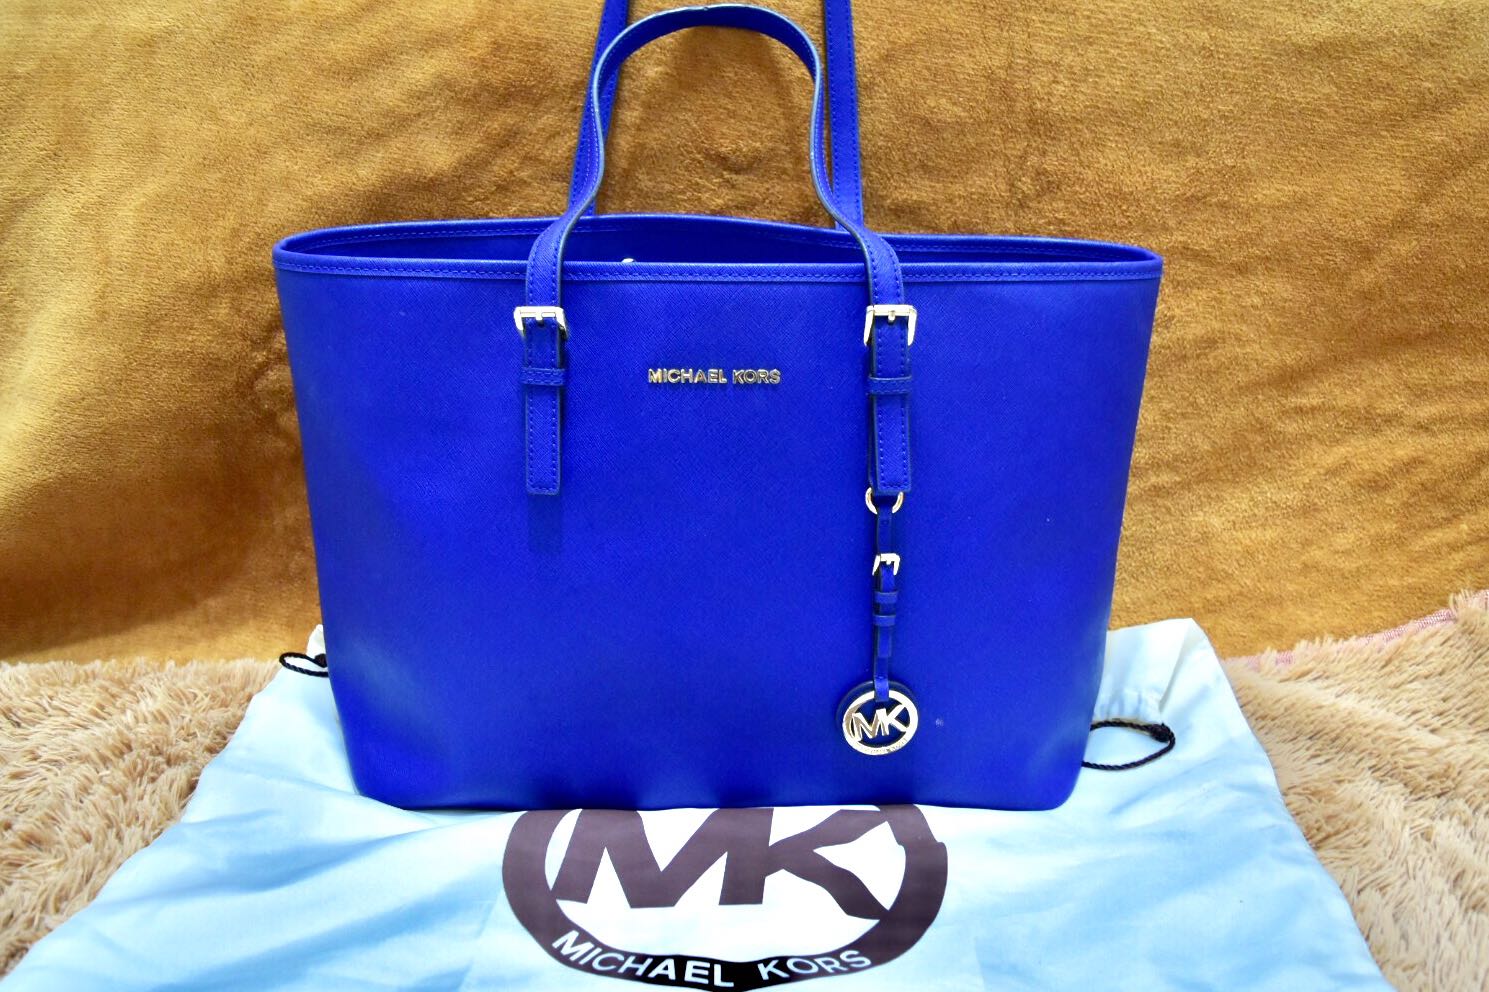 Michael Kors Jet Set Crossbody Bag Large Sapphire Blue Saffiano Leather New  With Tags